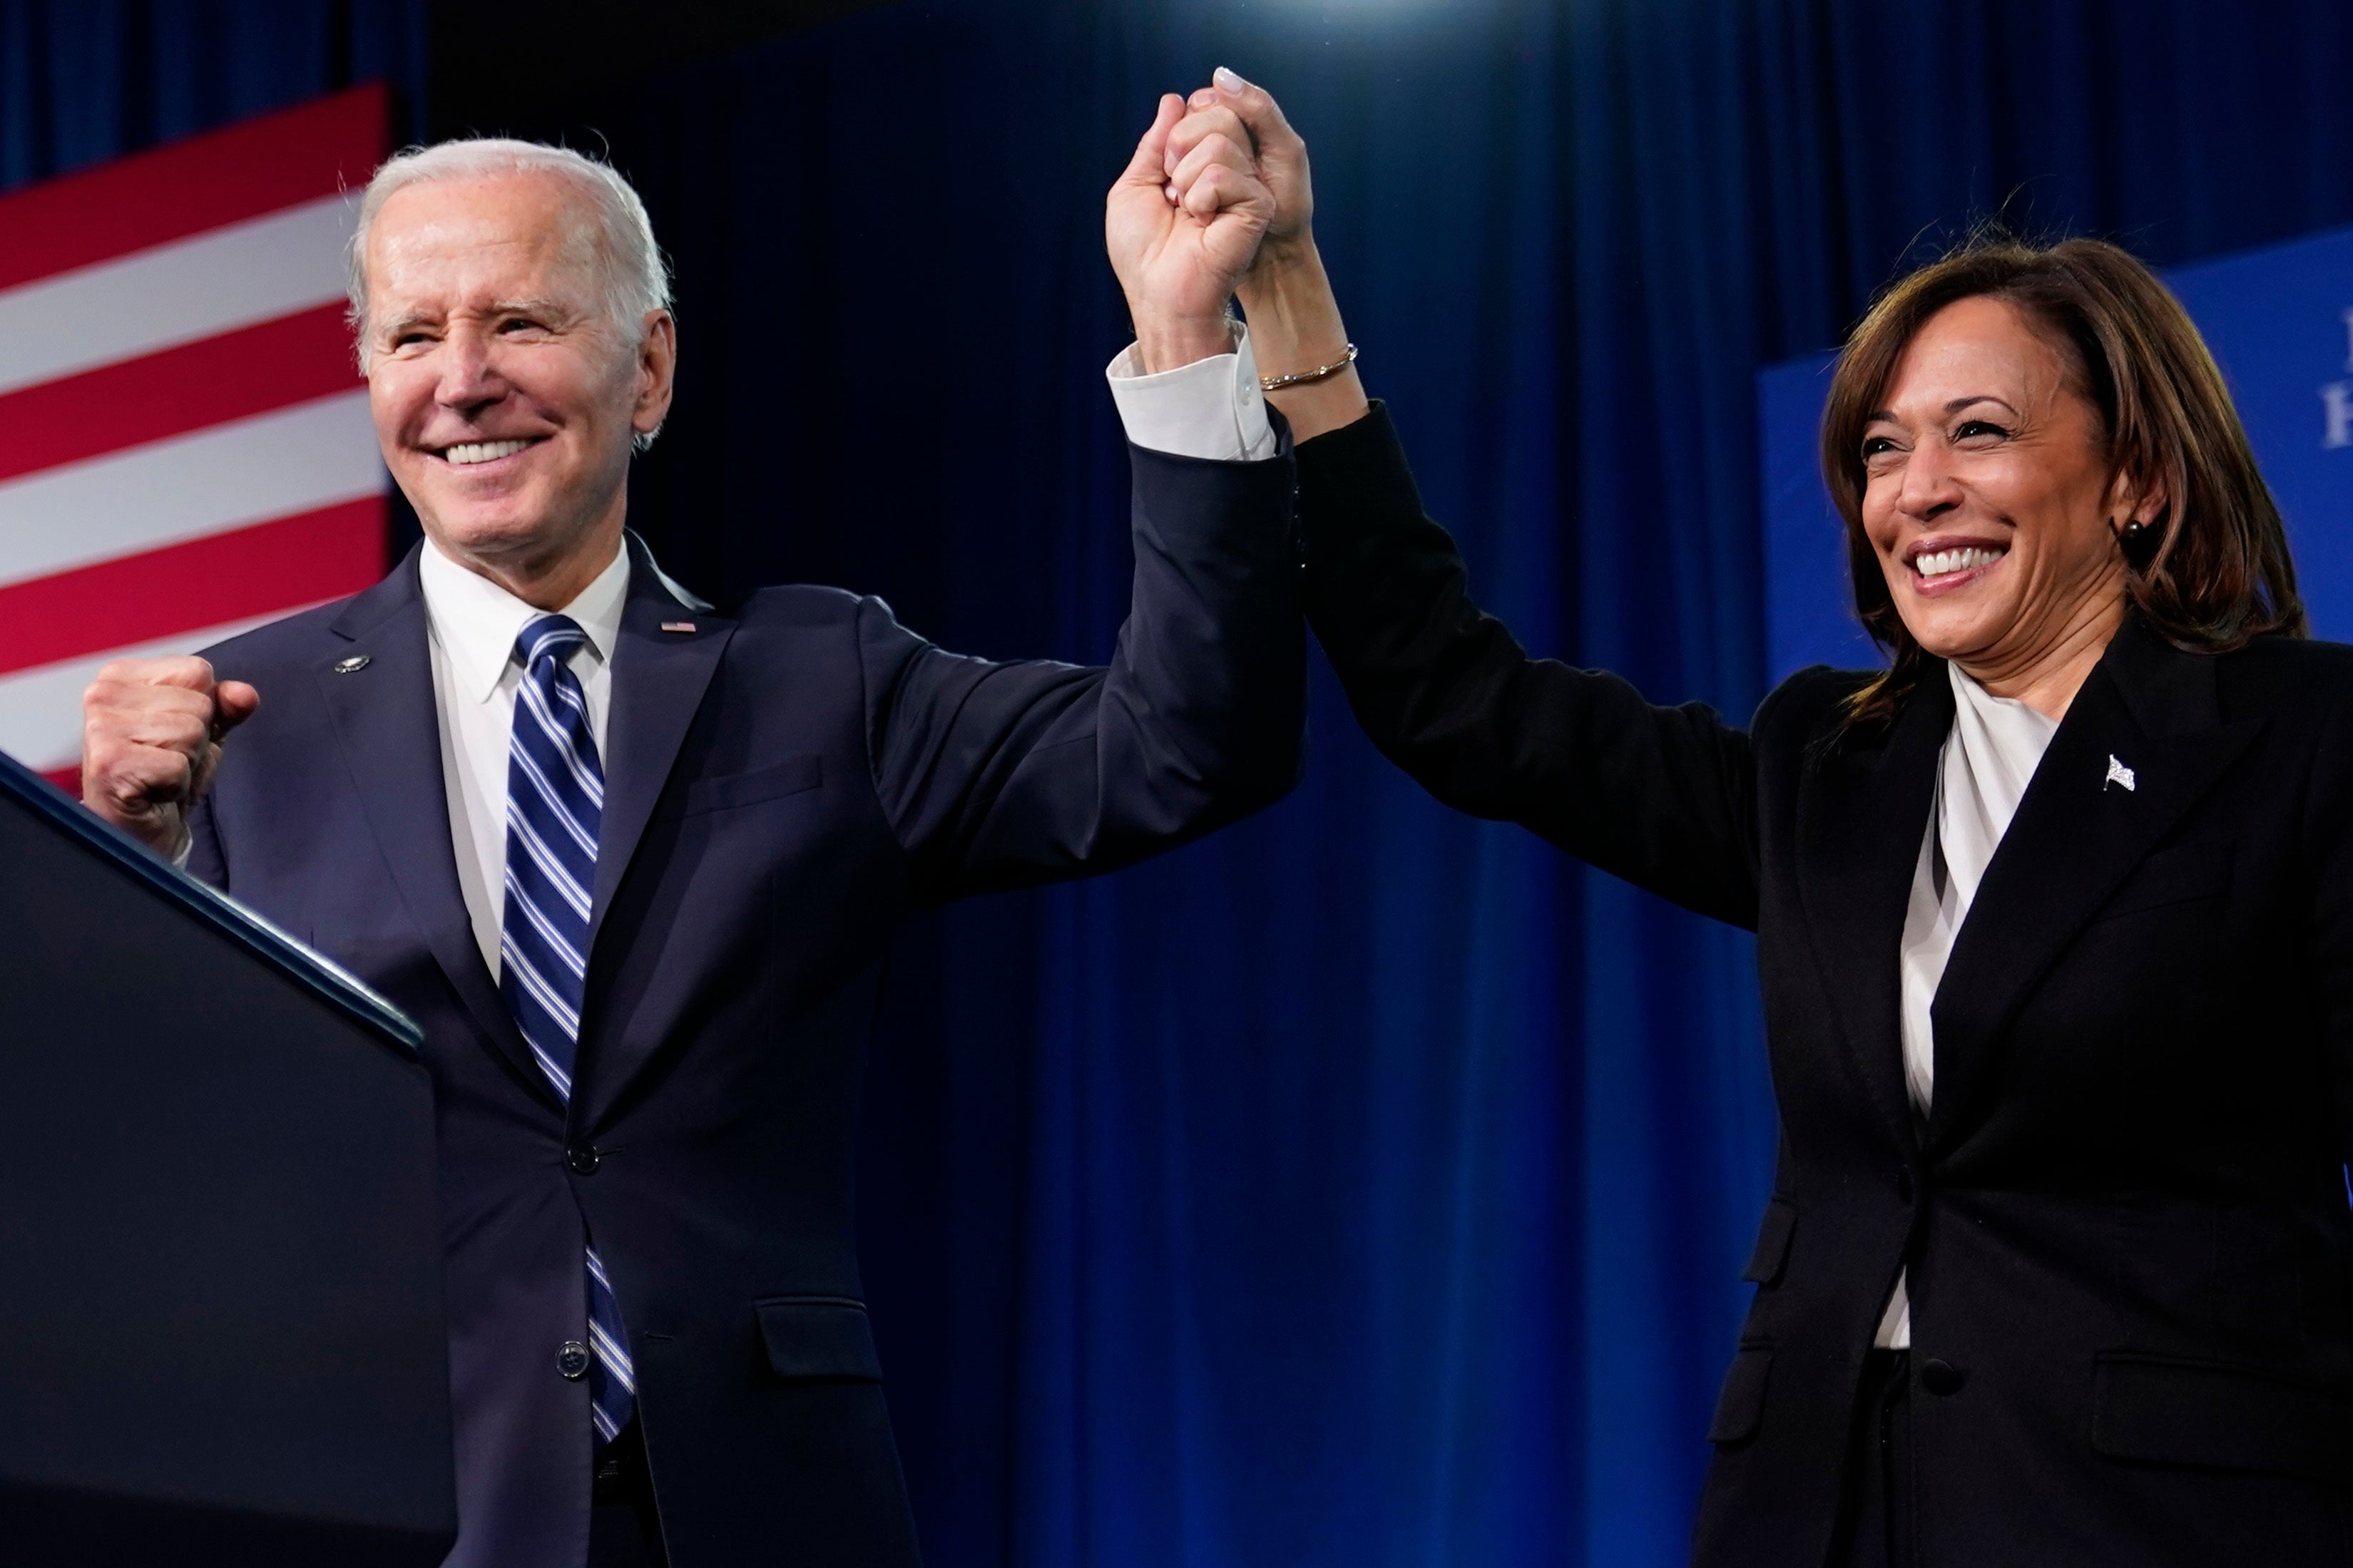 Sources told The Independent that campaign staffers are preparing to shift their focus to elevating, then electing, Vice President Kamala Harris, instead of Biden